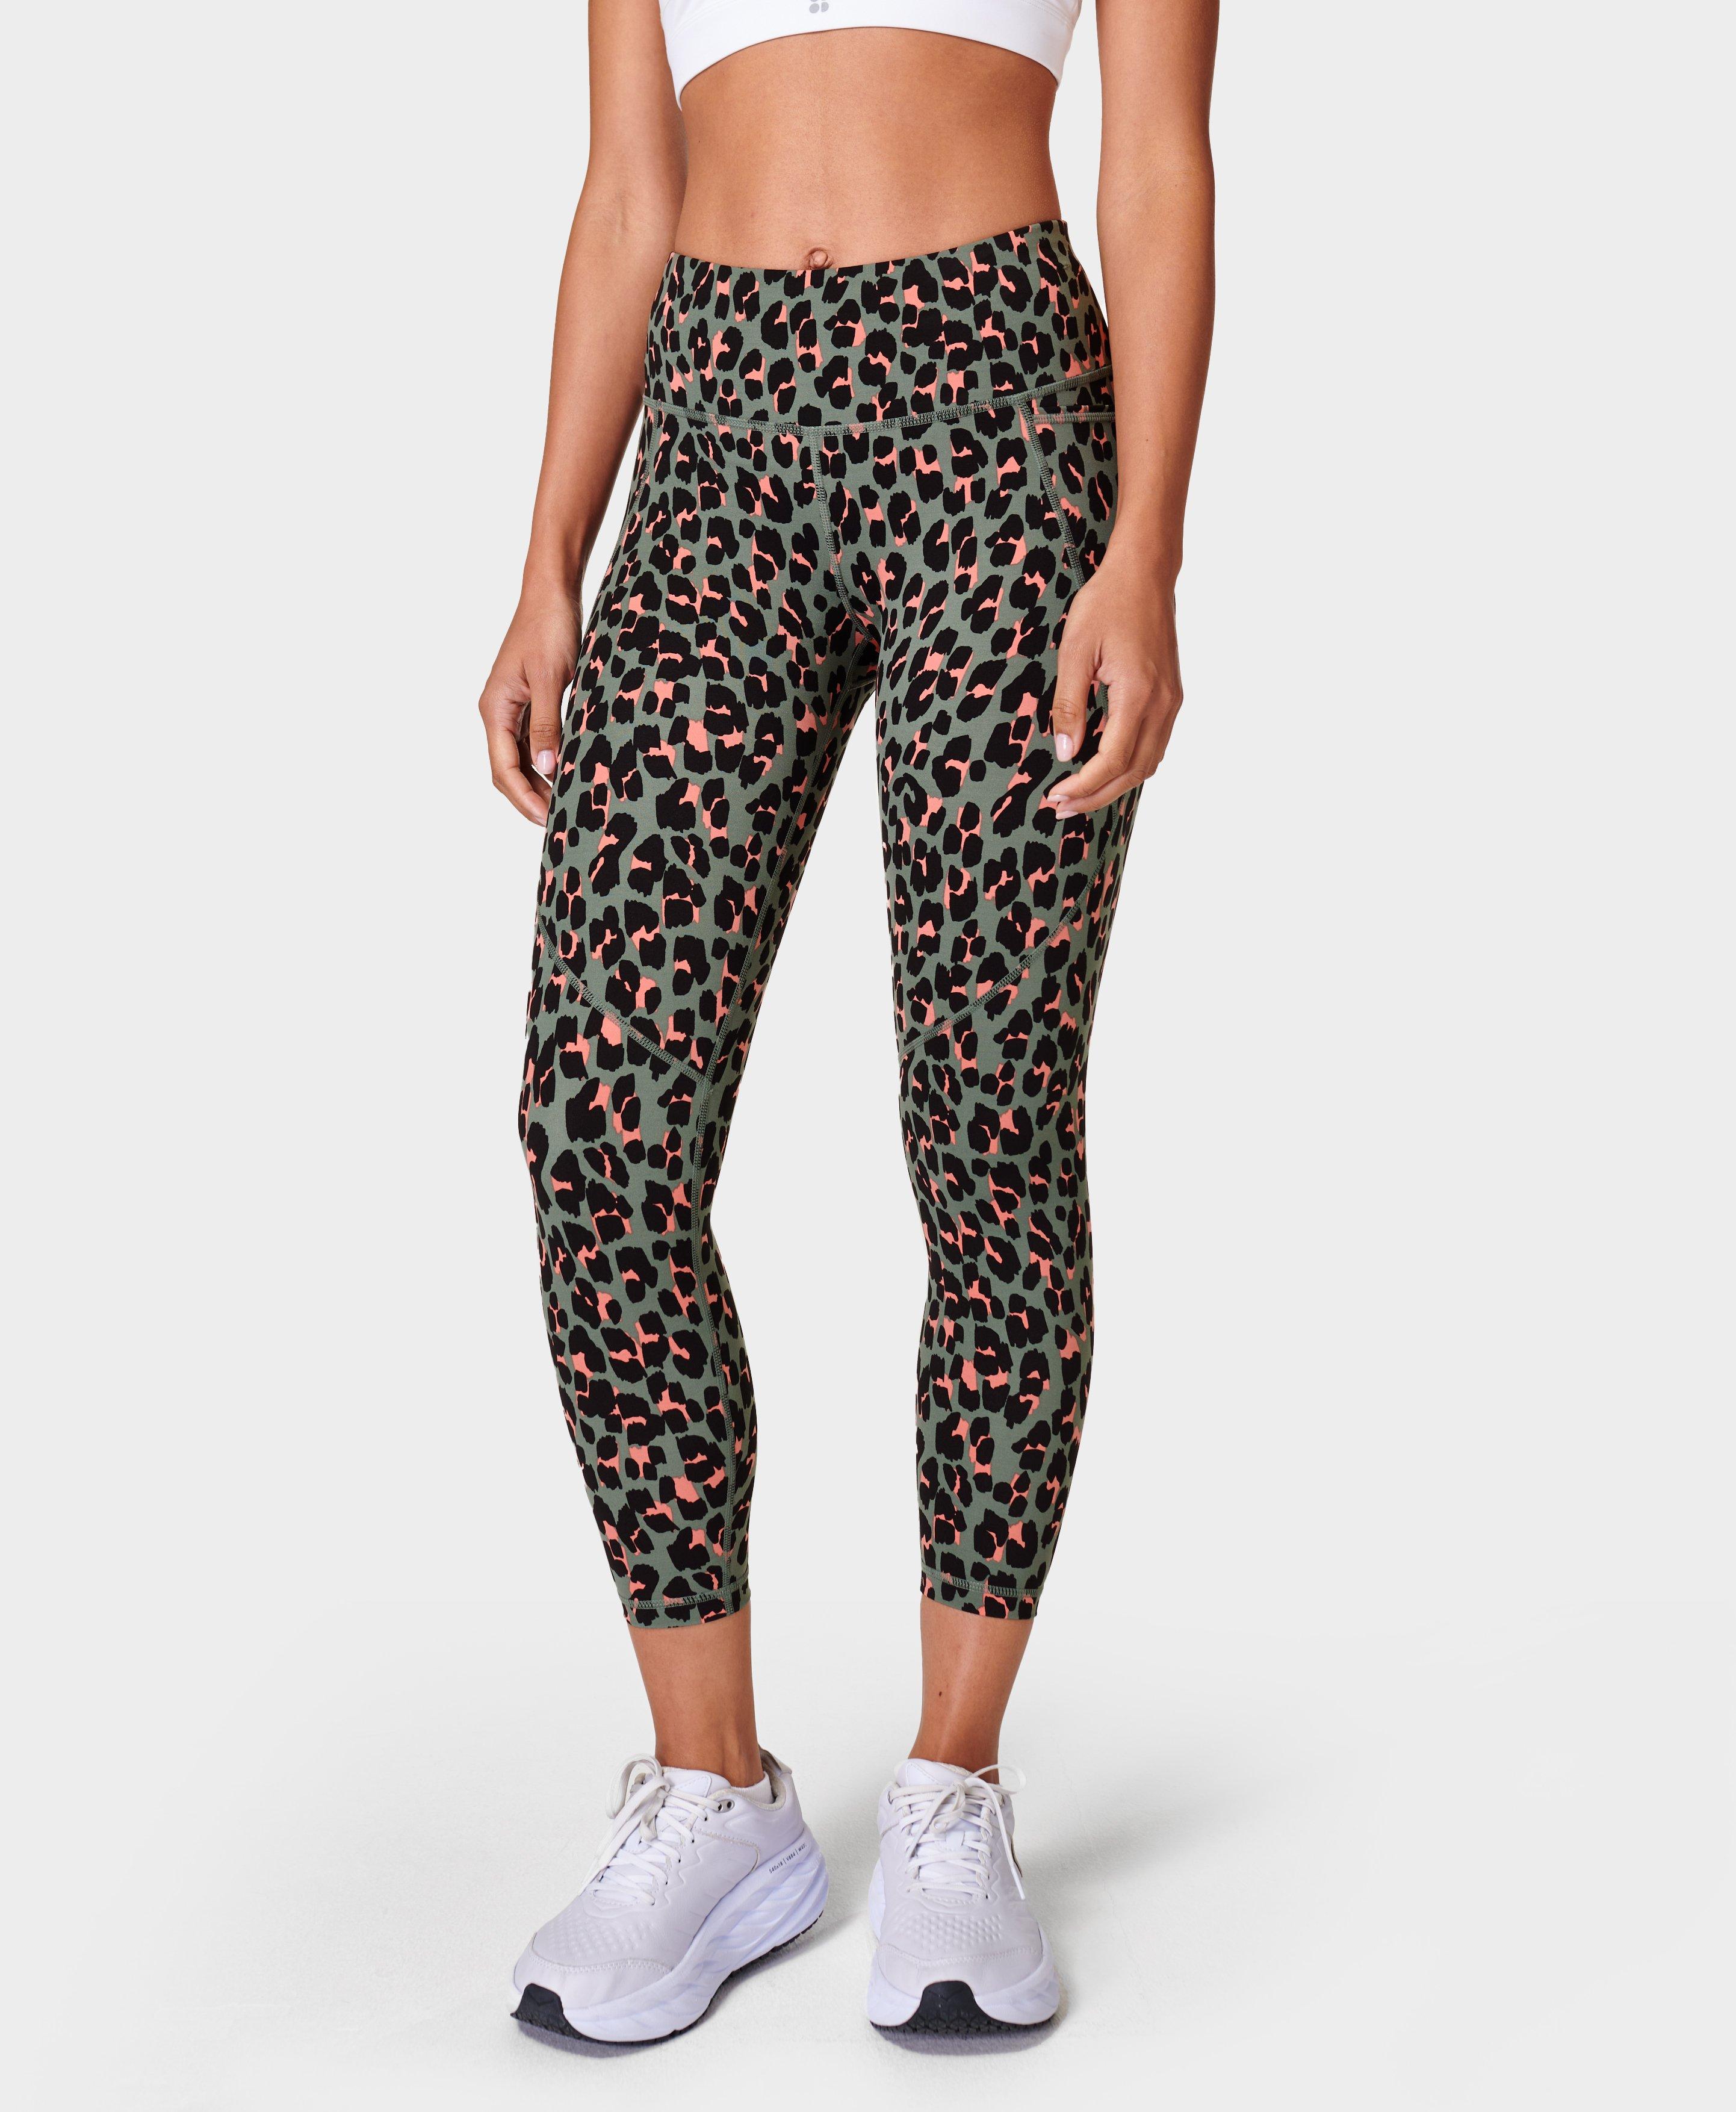 Nike Women's One Luxe Tight Fit Mid Rise Cheetah Print Leggings  (White/Black, X-Small)